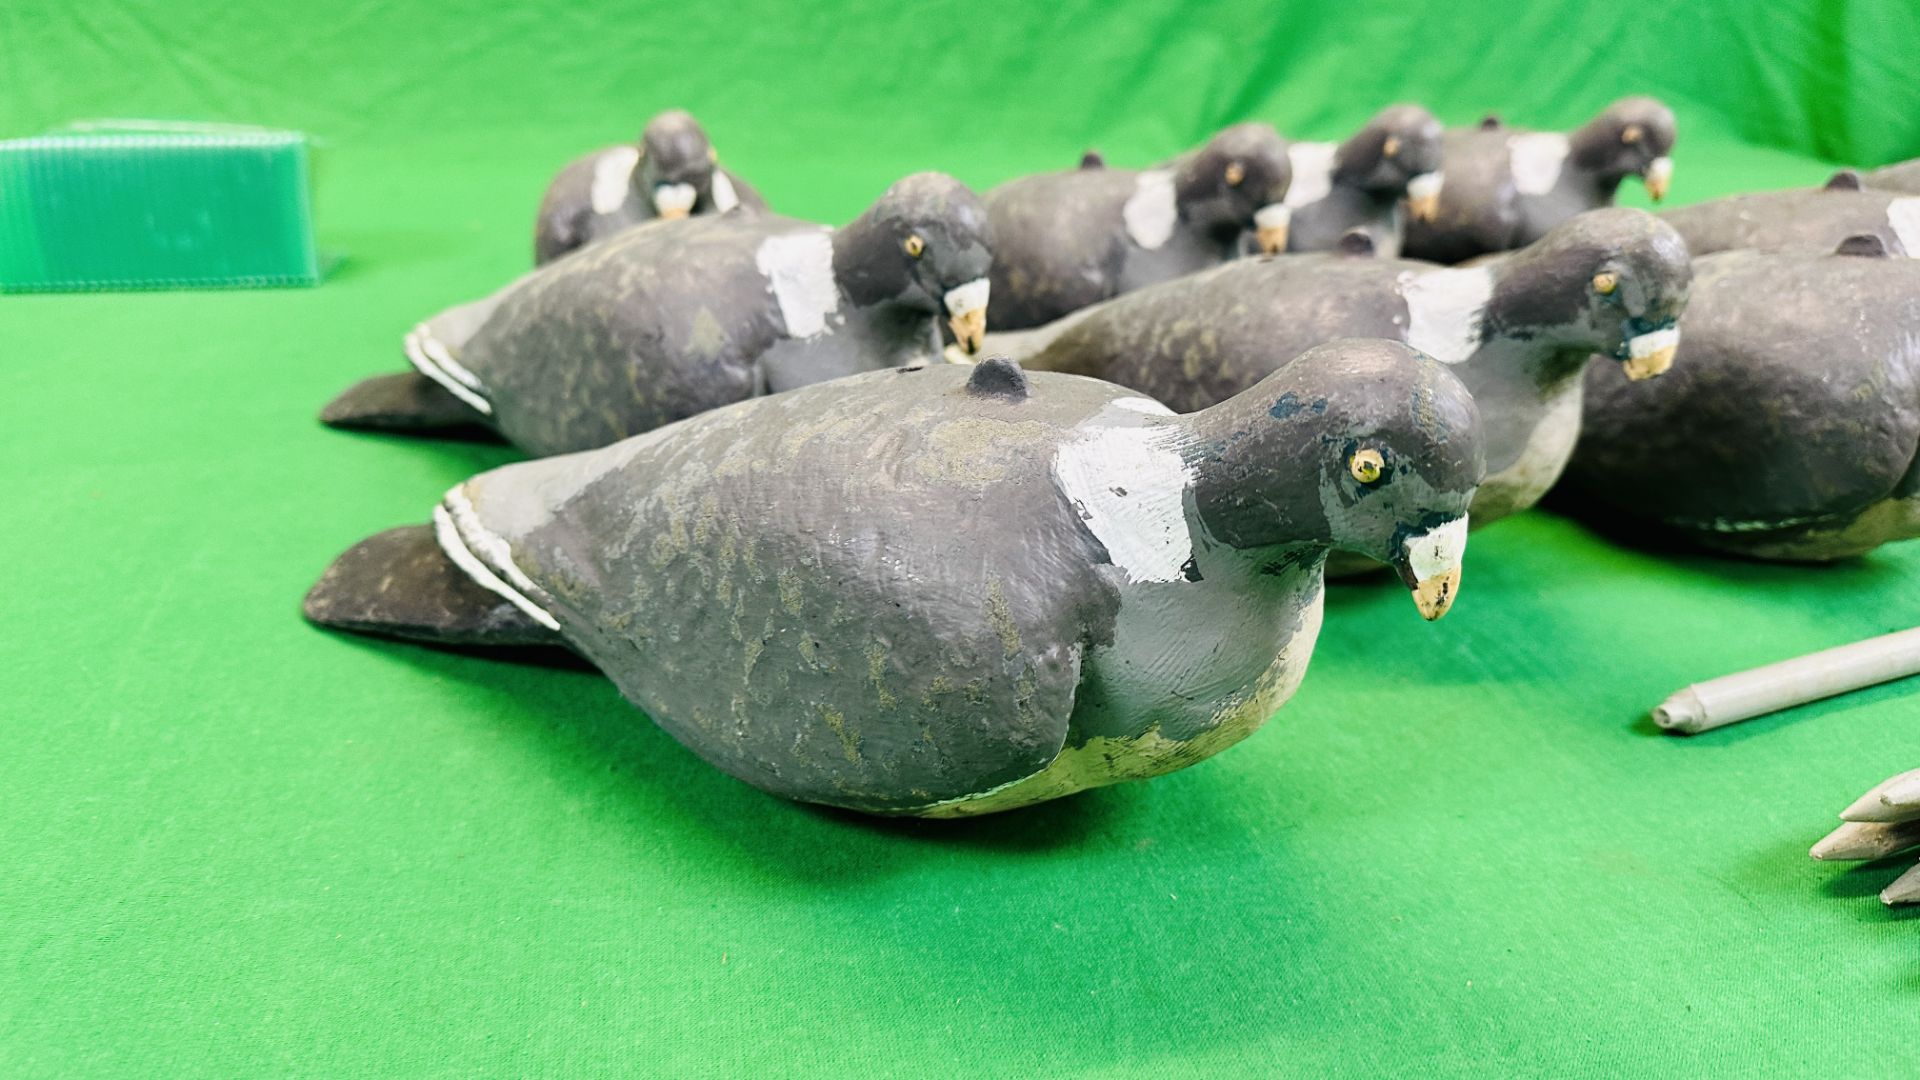 A CAMOUFLAGE HOLD-ALL CONTAINING 10 FLEXI COY PIGEON DECOYS WITH GROUND STAKES. - Image 2 of 8